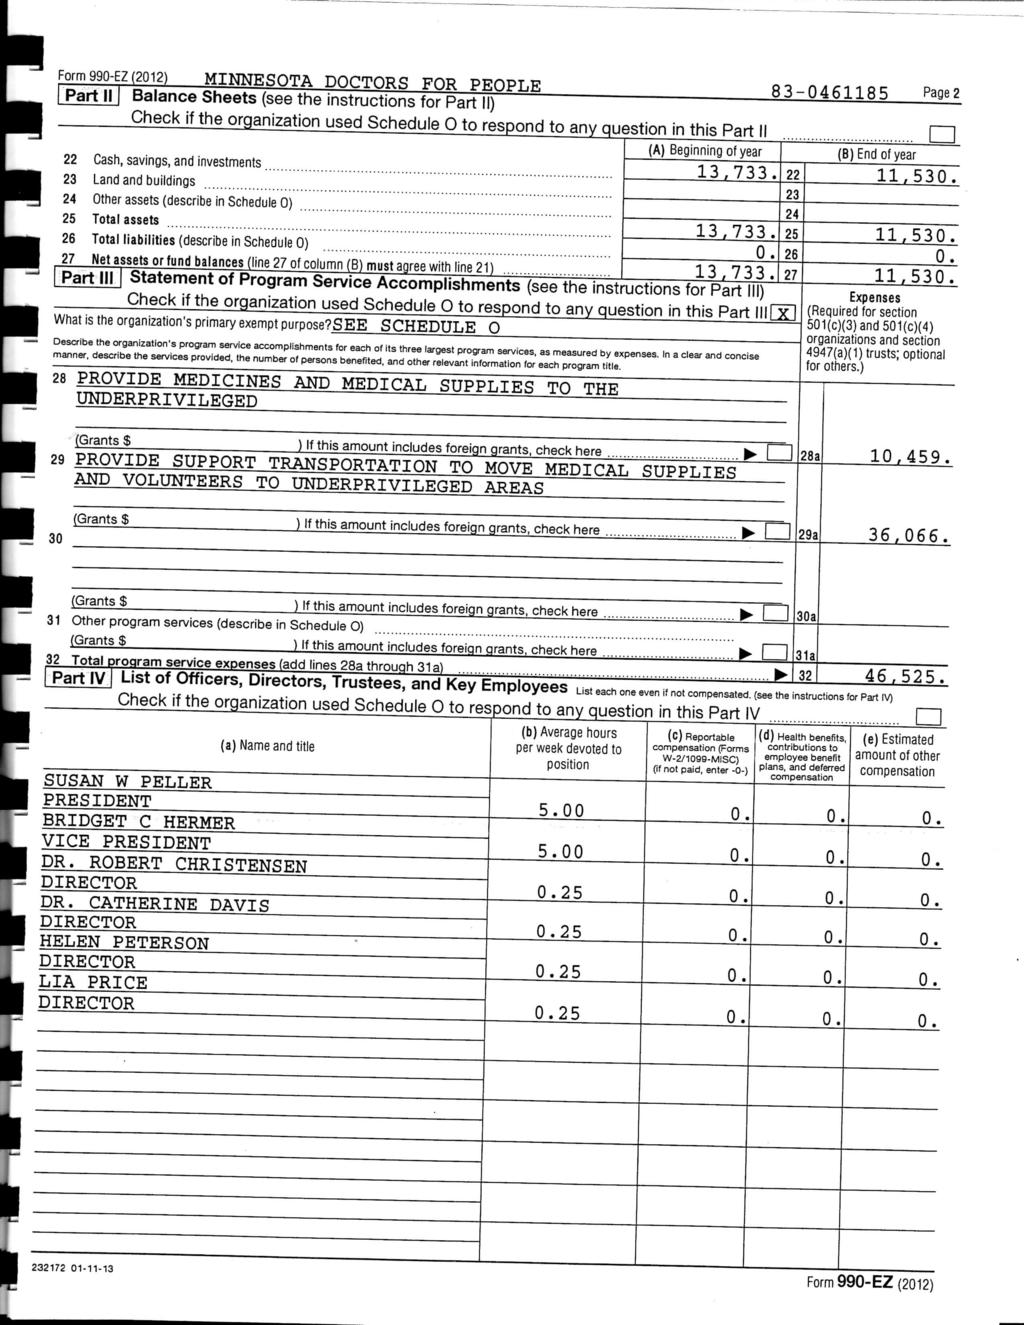 Form 990-EZ (2012) MINNESOTA DOCTORS FOR PEOPLE 83-0461185 Page2 Part II Balance Sheets (see the instructions for Part II) Check if the organization used Schedule 0 to respond to any question in this